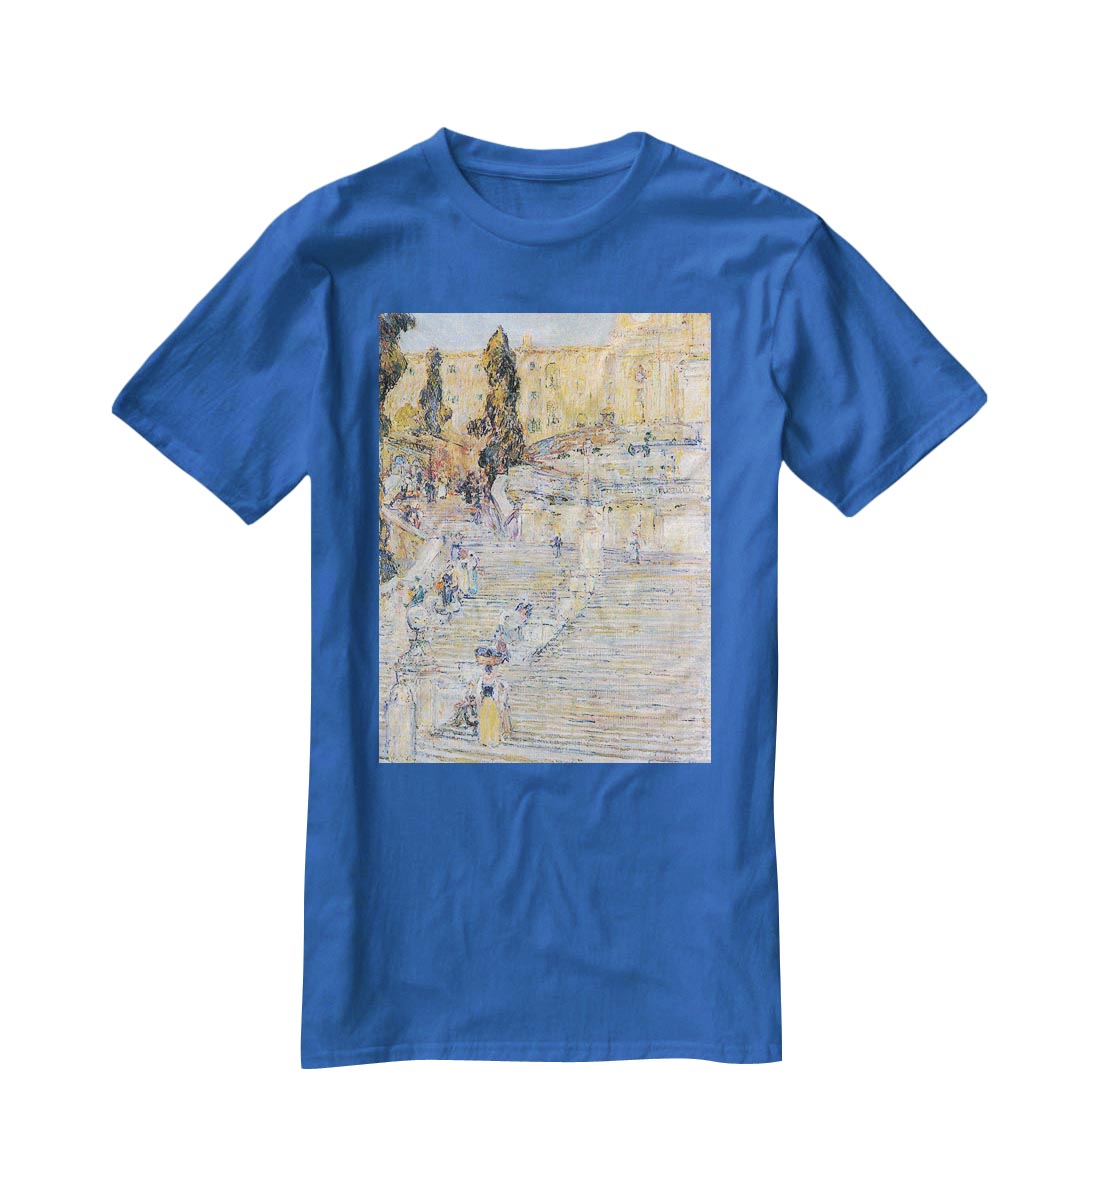 The Spanish steps by Hassam T-Shirt - Canvas Art Rocks - 2